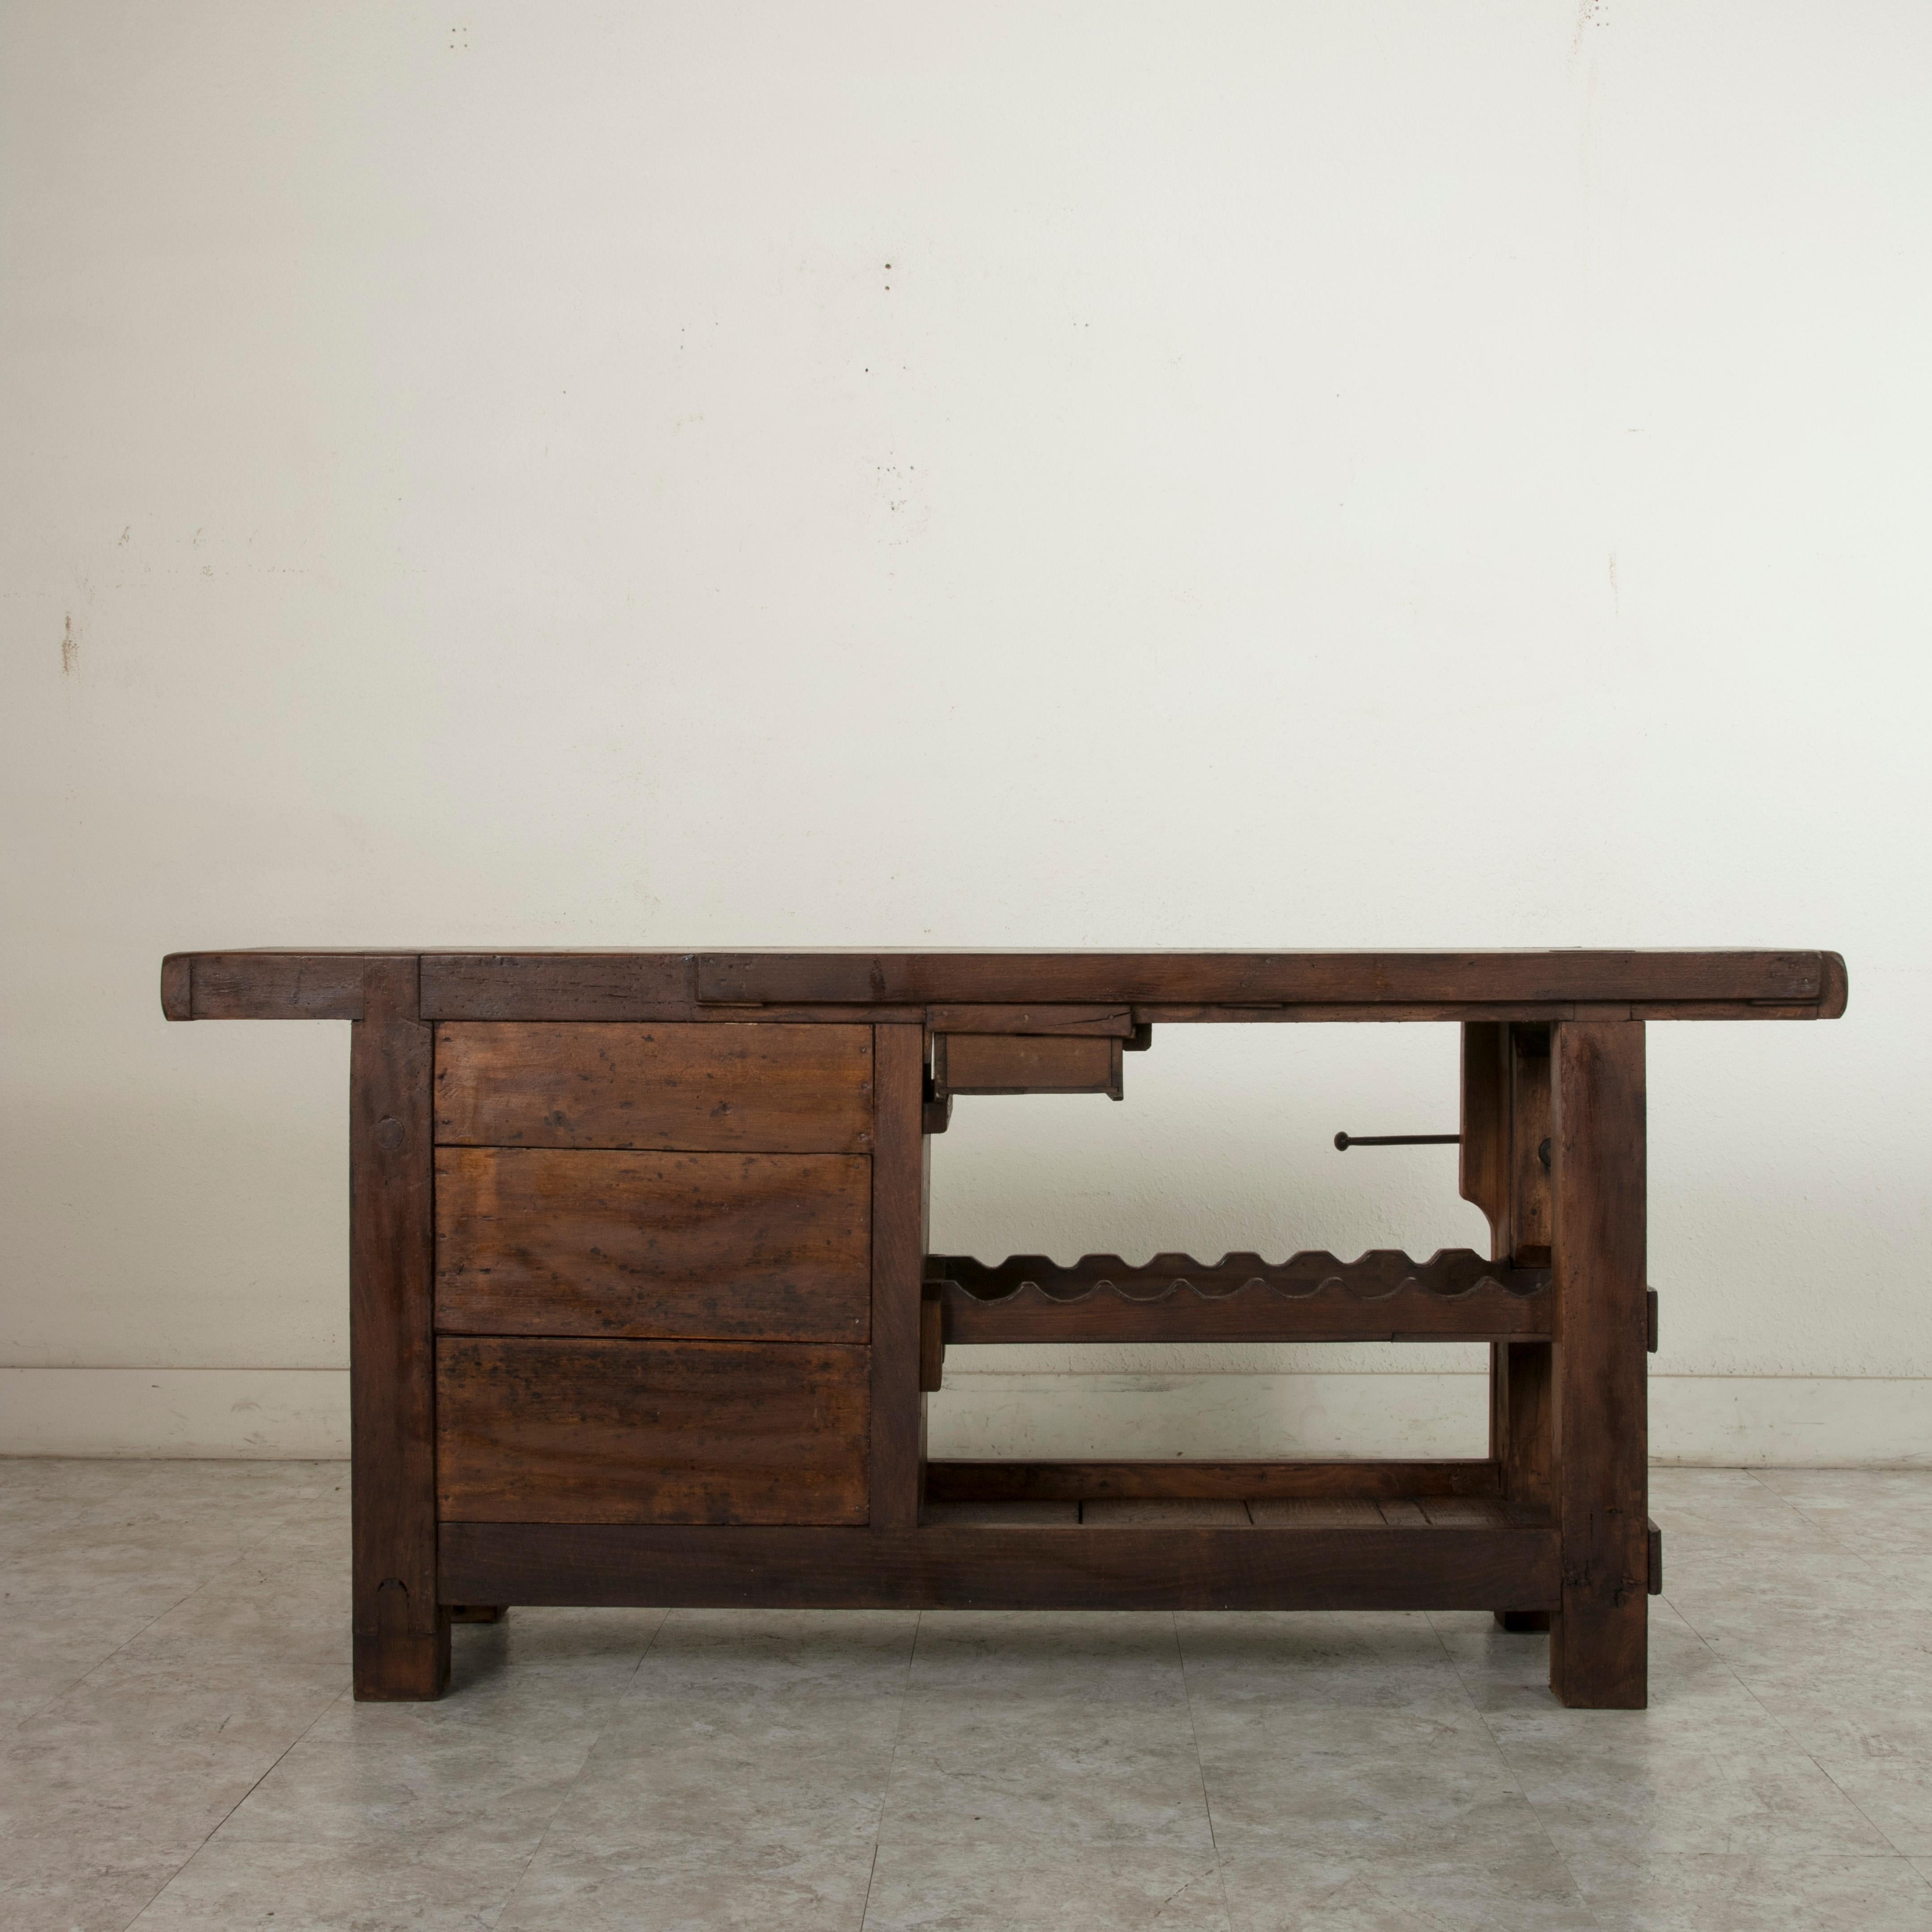 Rustic Early 20th Century French Oak Workbench, Console, Sofa Table, Vise and Wine Rack